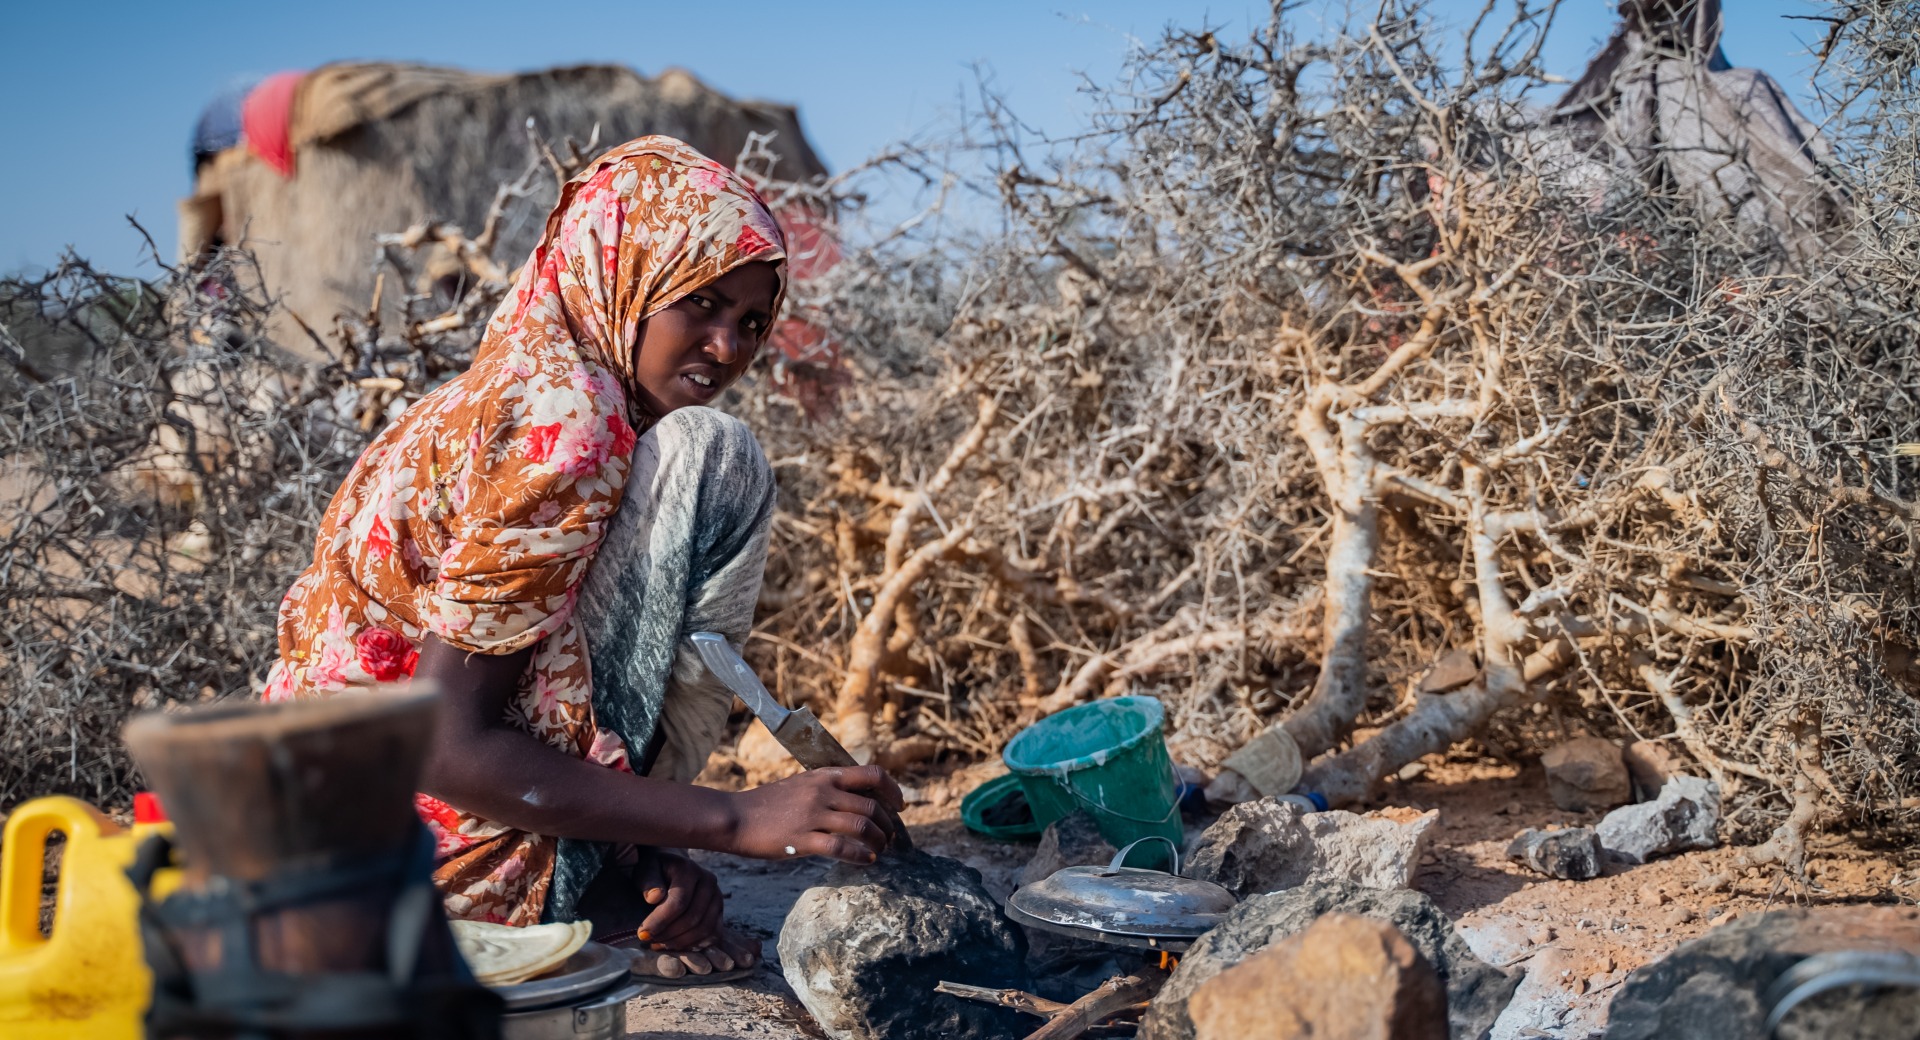 A girl, 16, makes breakfast for her family. Because of the drought and increase in food prices, nomadic communities like hers have struggled to survive.